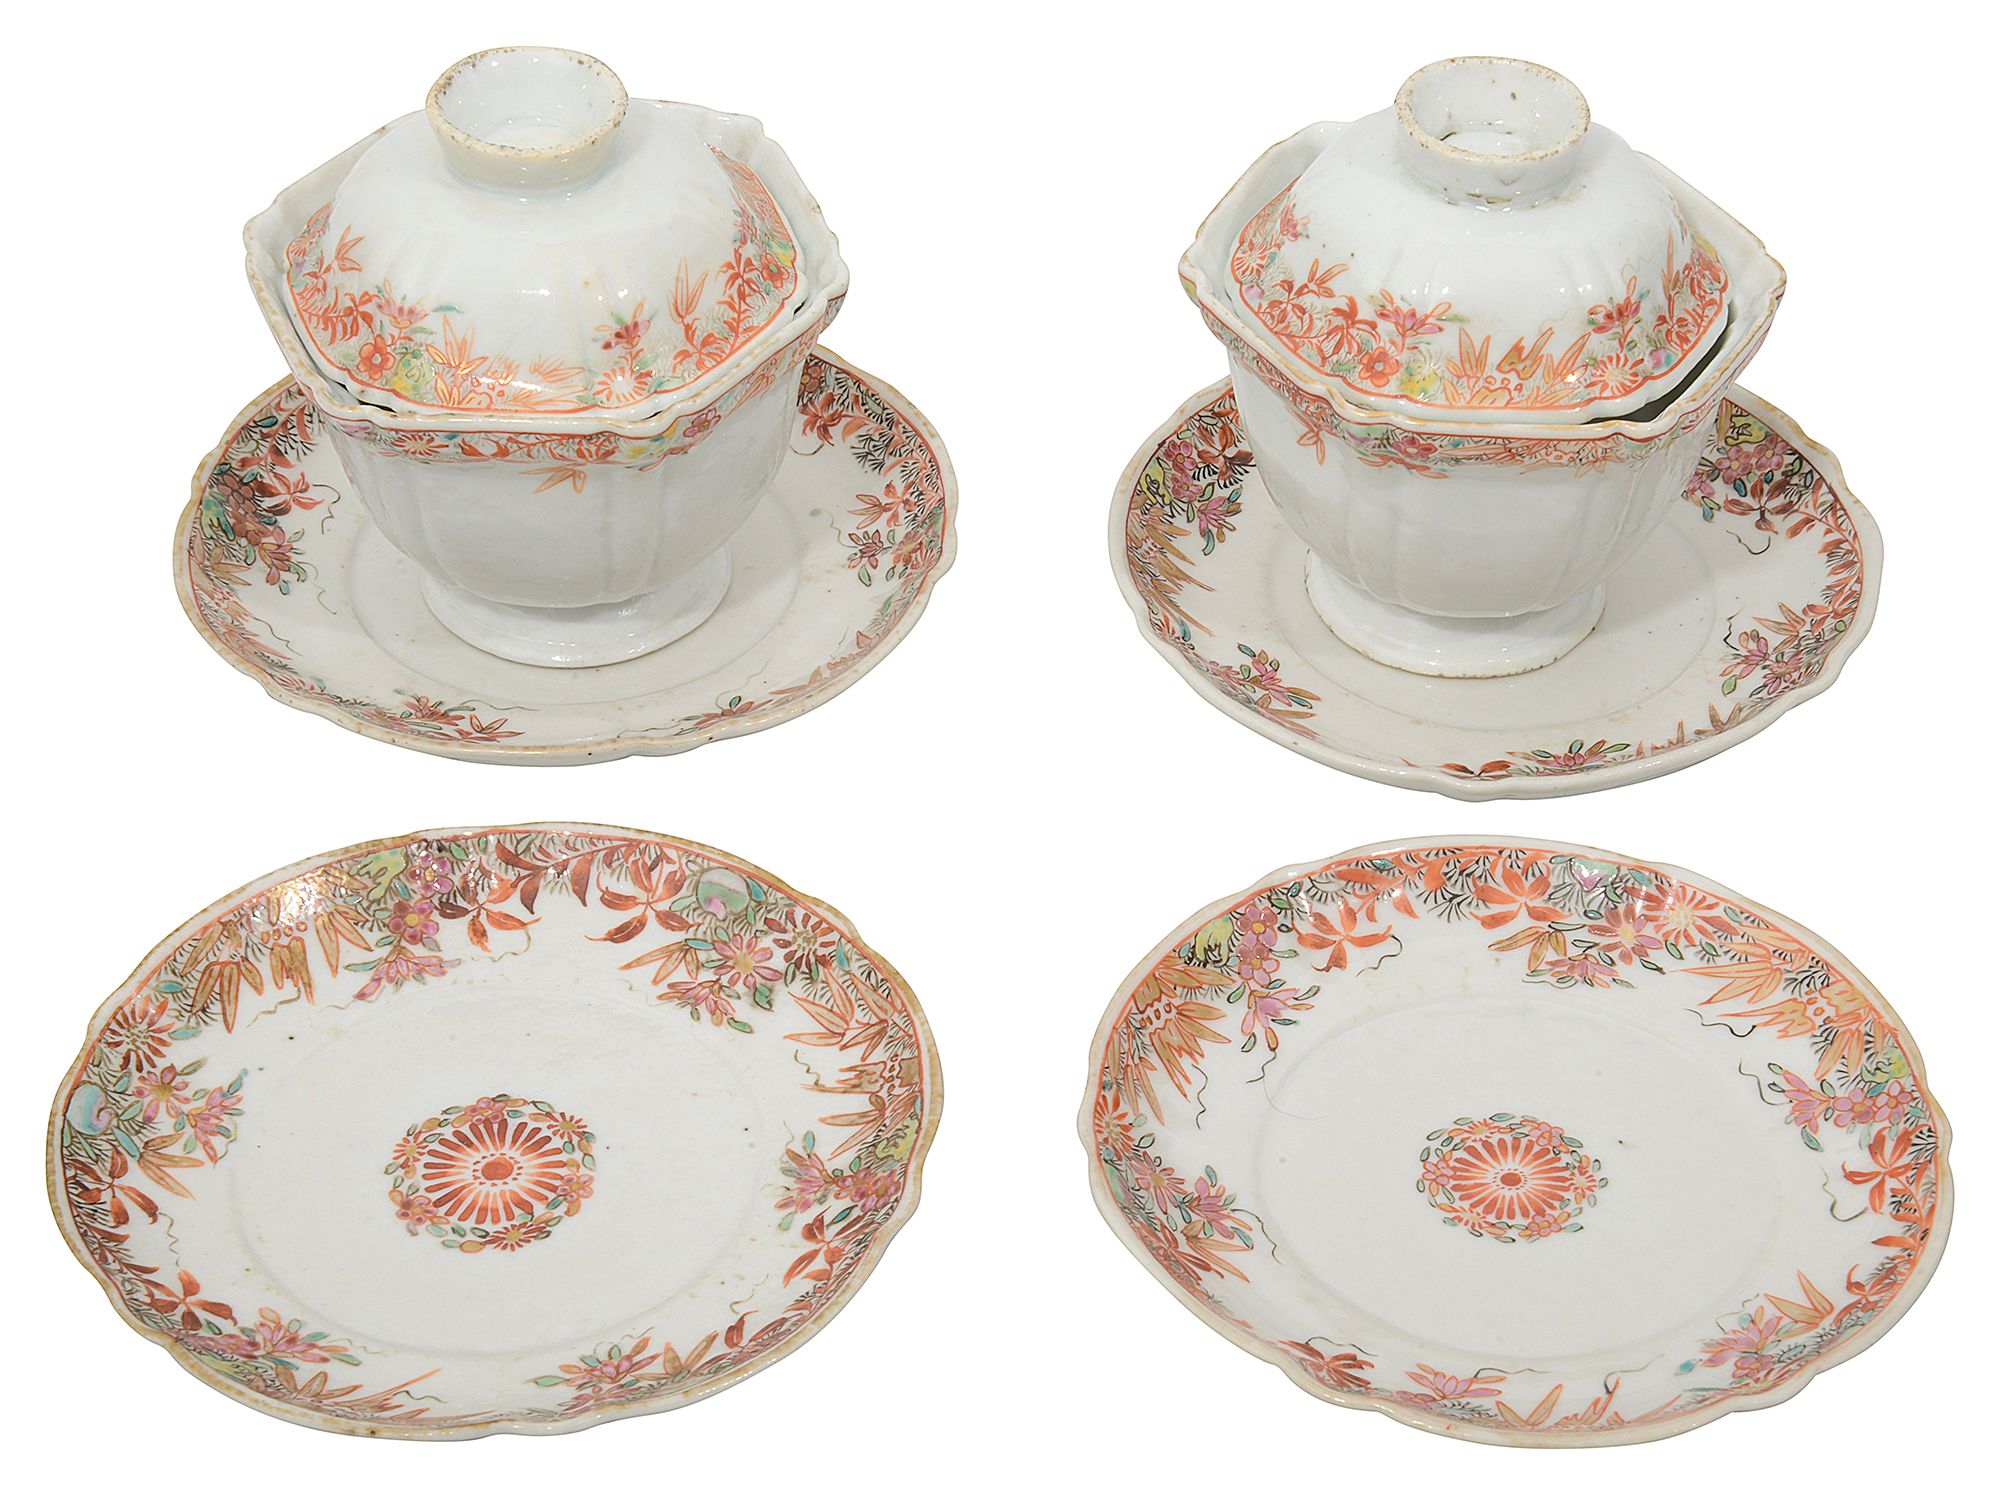 Two mid 18th century Chinese export porcelain hexagonal covered tea bowls and four saucers